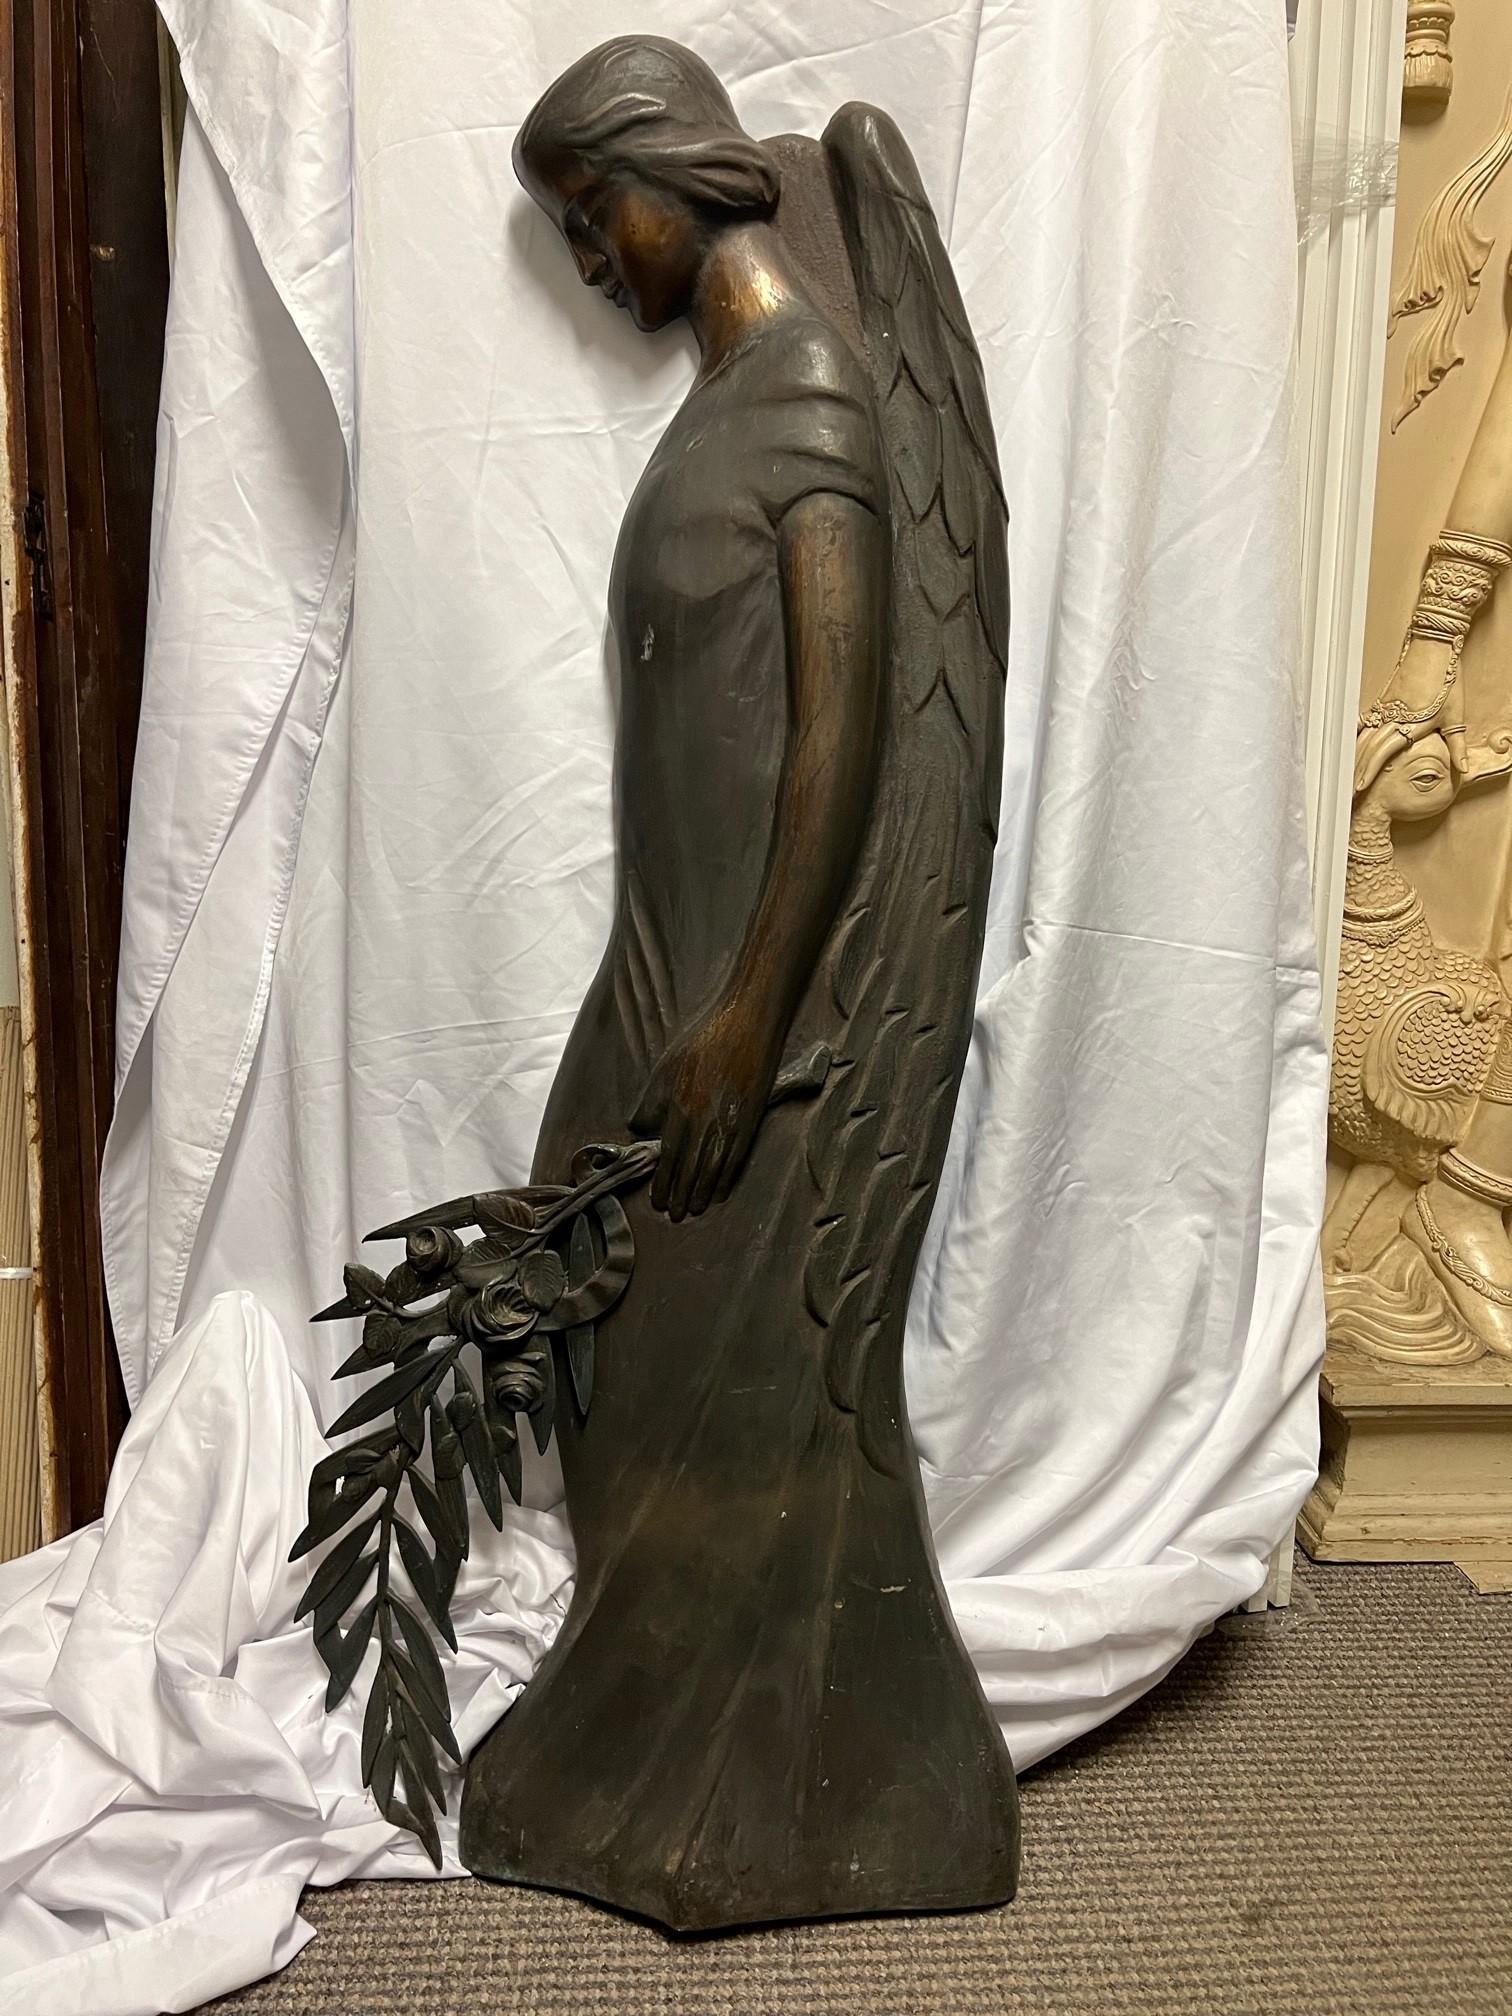 Hard to find early 20th century antique bronze praying angel holding palms mourning the death of a loved one. The palm branch is a Christian symbol of eternal life and triumph over death. Angels represent the connection between heaven and earth, as